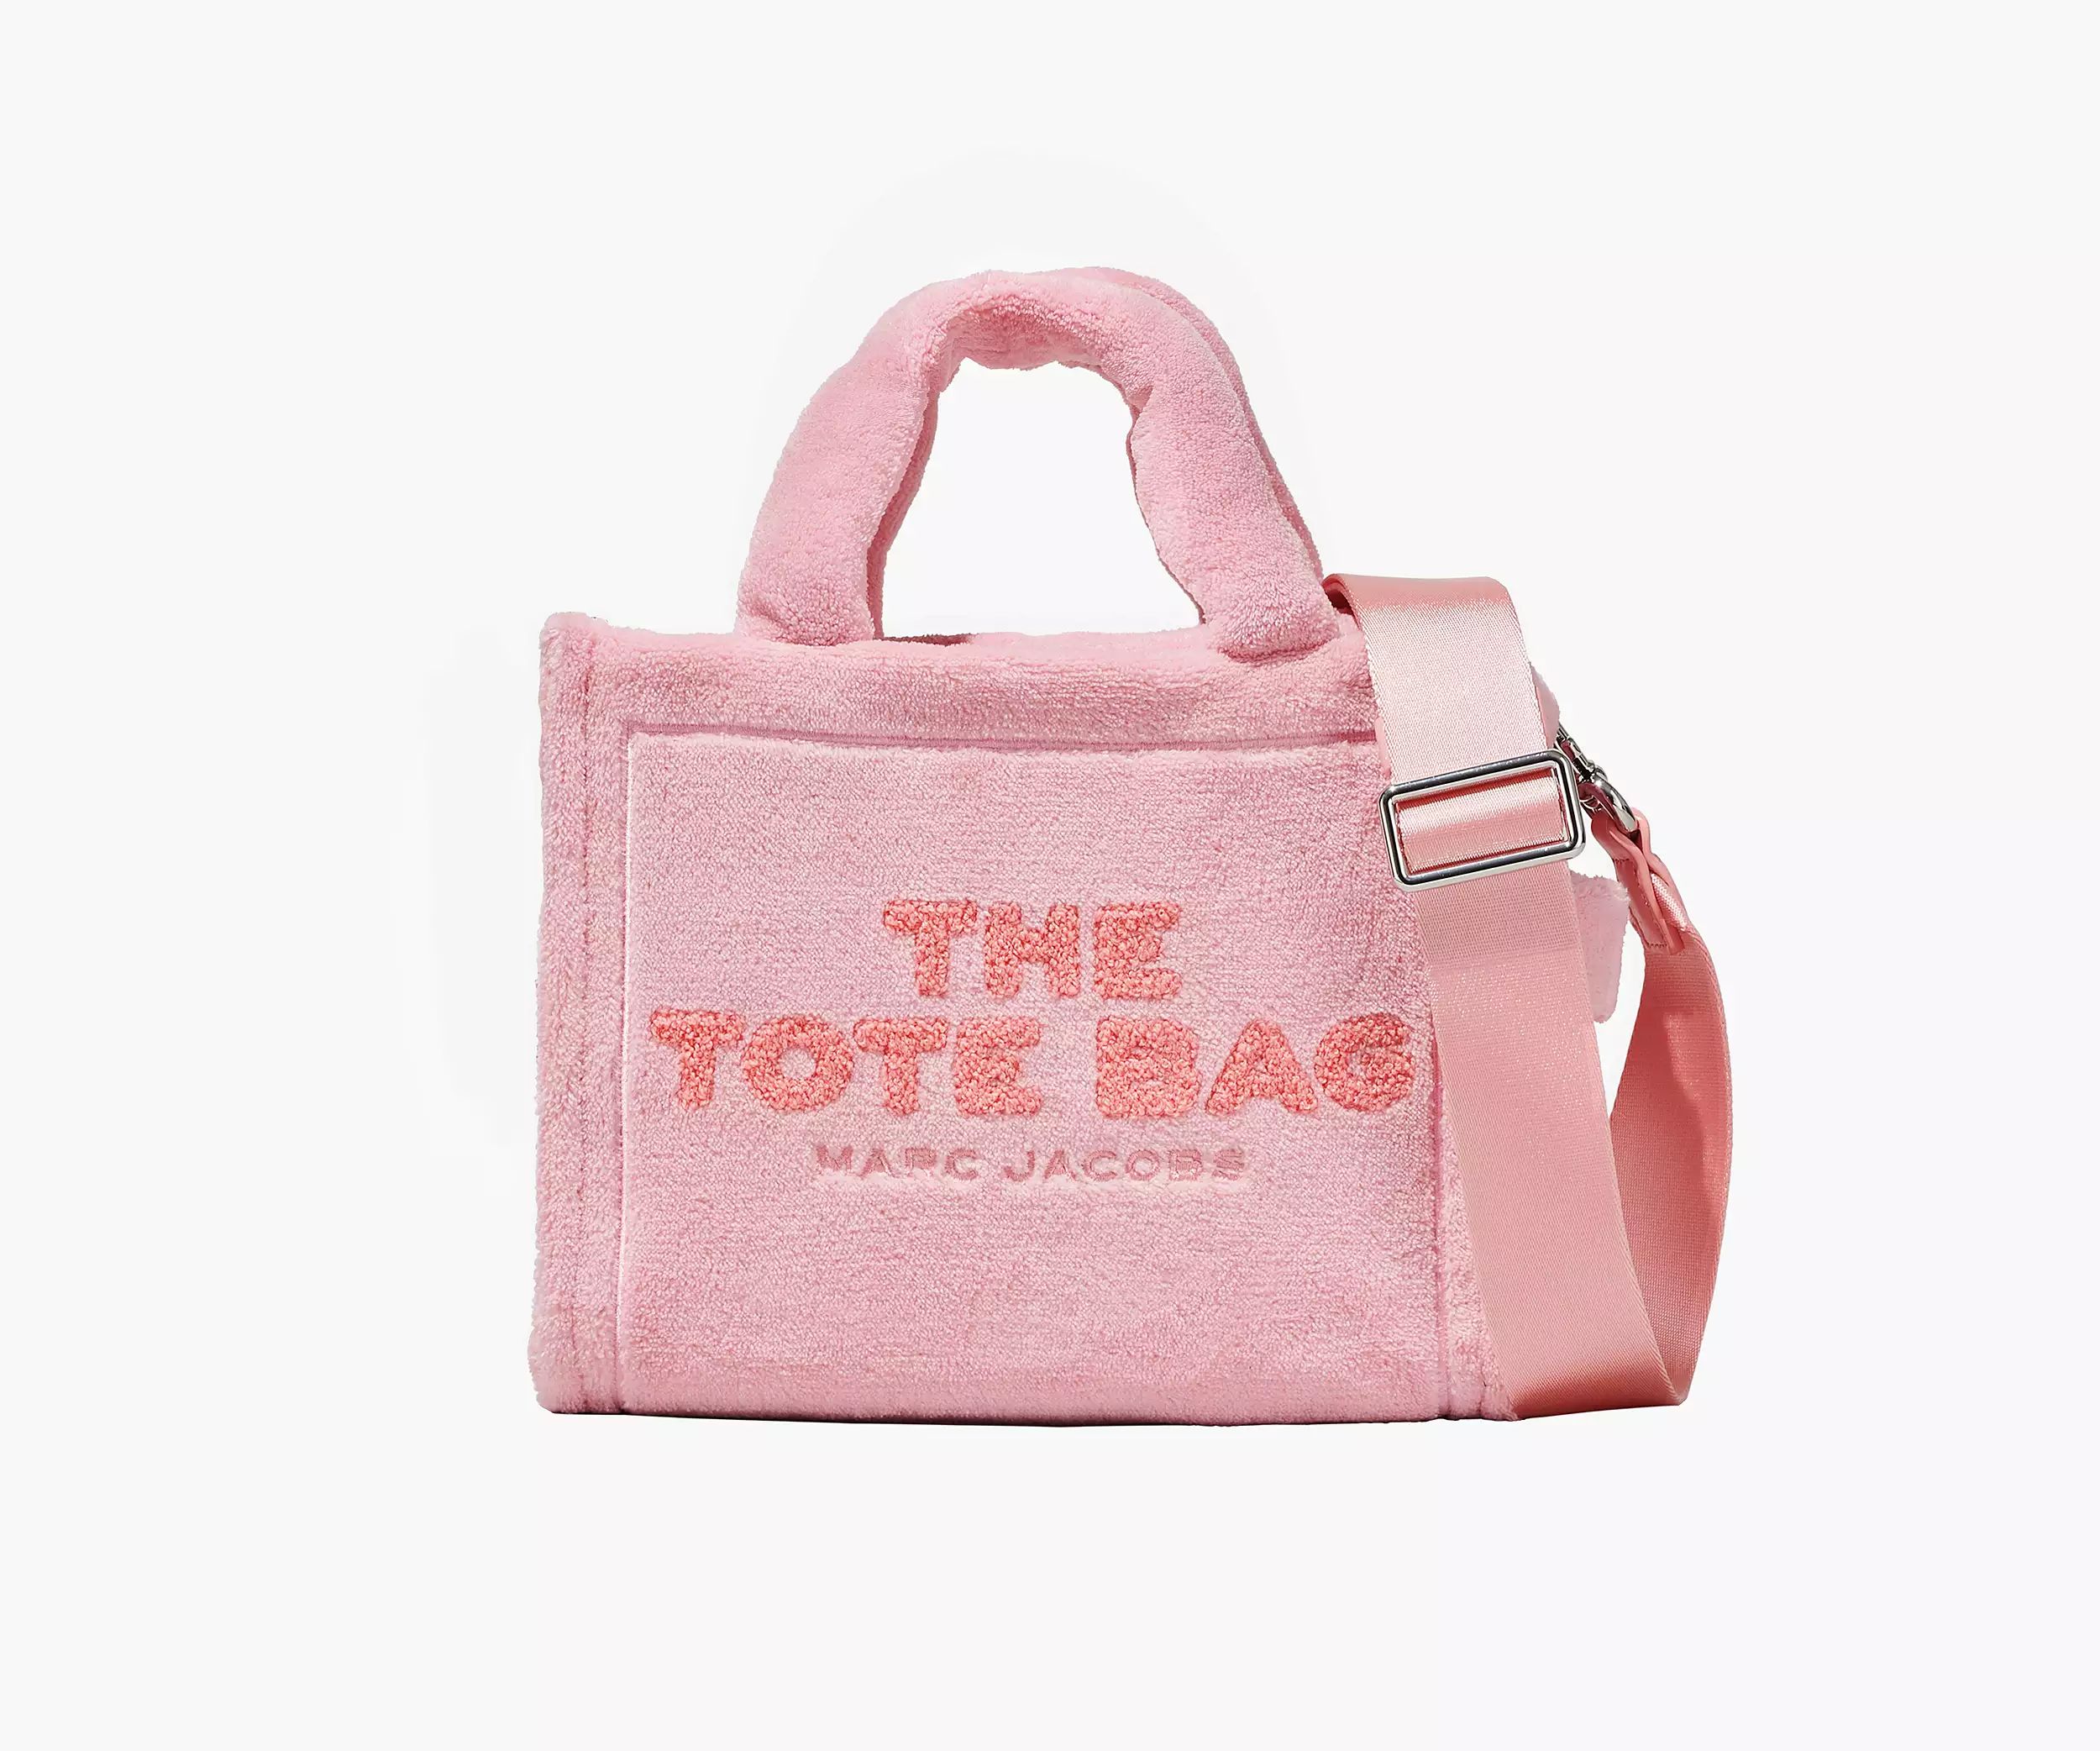 The Terry Medium Tote Bag | Marc Jacobs